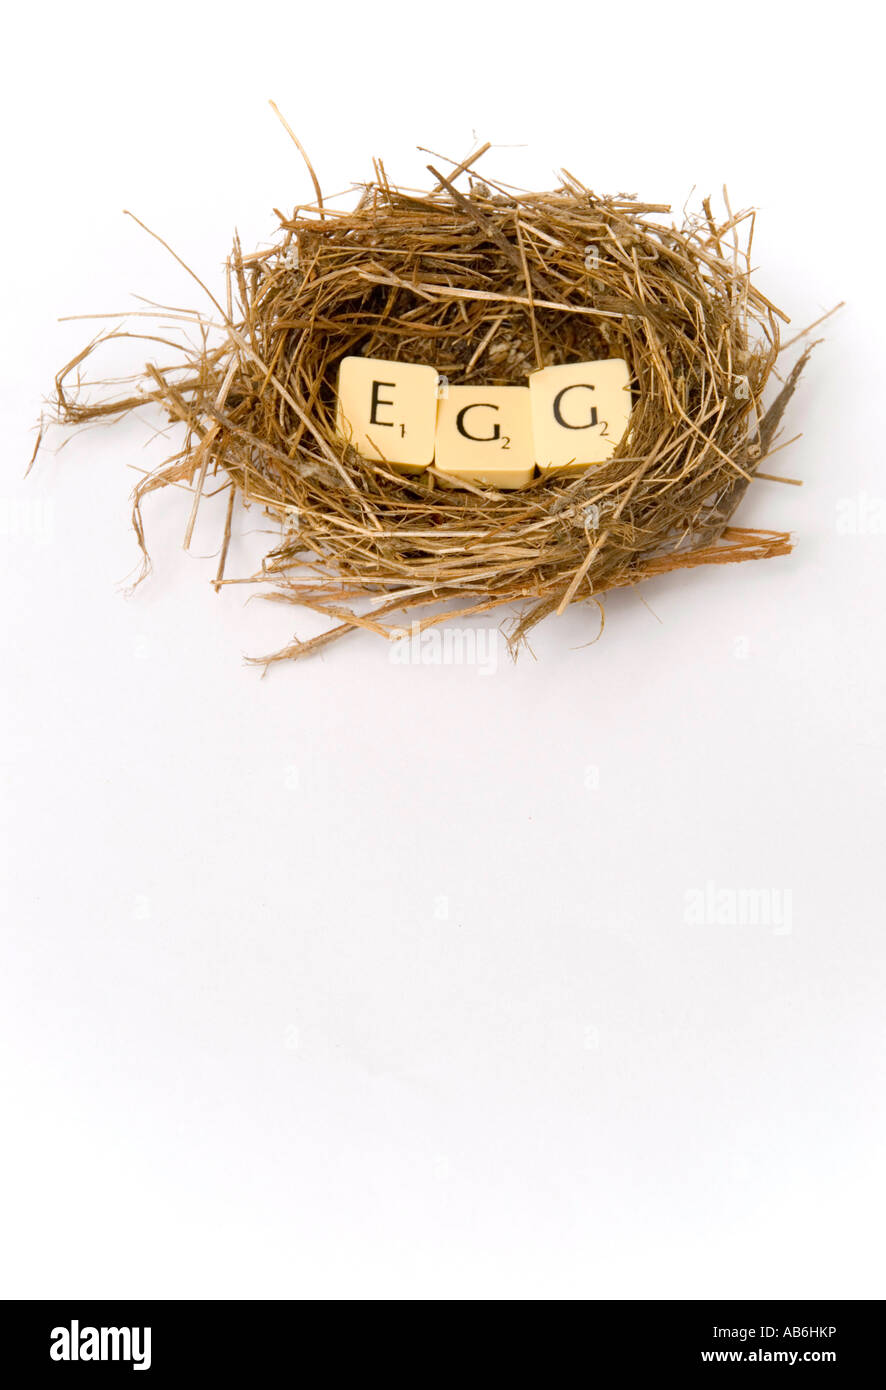 Bird nest with Scrabble letters spelling out the word egg, as in nest egg or accumulated assets Stock Photo